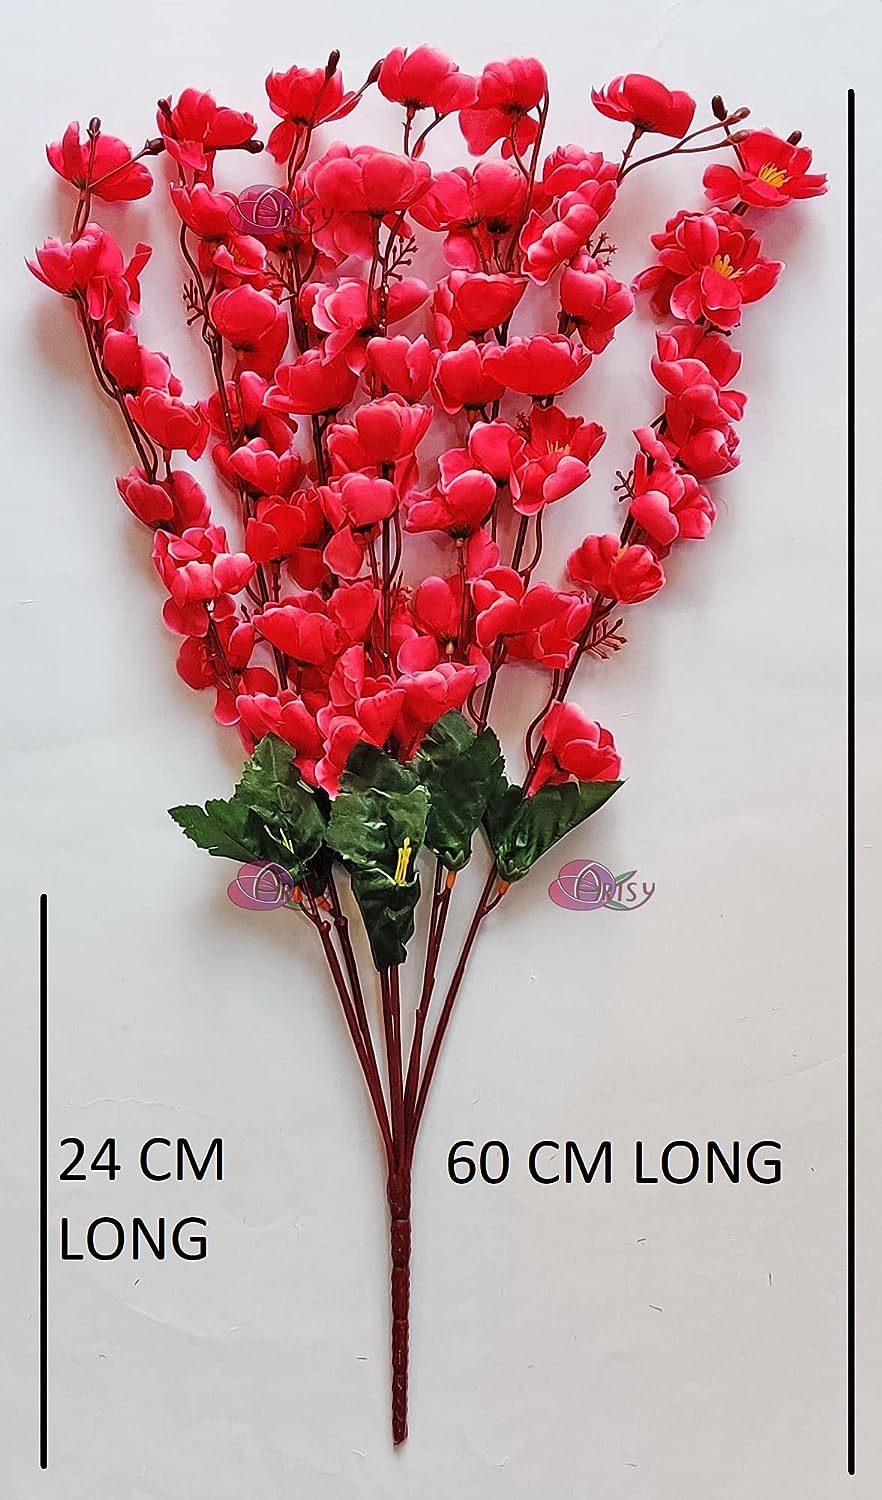 ARTSY® Artificial Cherry Blossom Flower - Captivating Pink For Vase Filler, Home decoration, Office decor - Single Piece Pack for Exquisite Floral Accent, Without Vase, 55 Cm Long